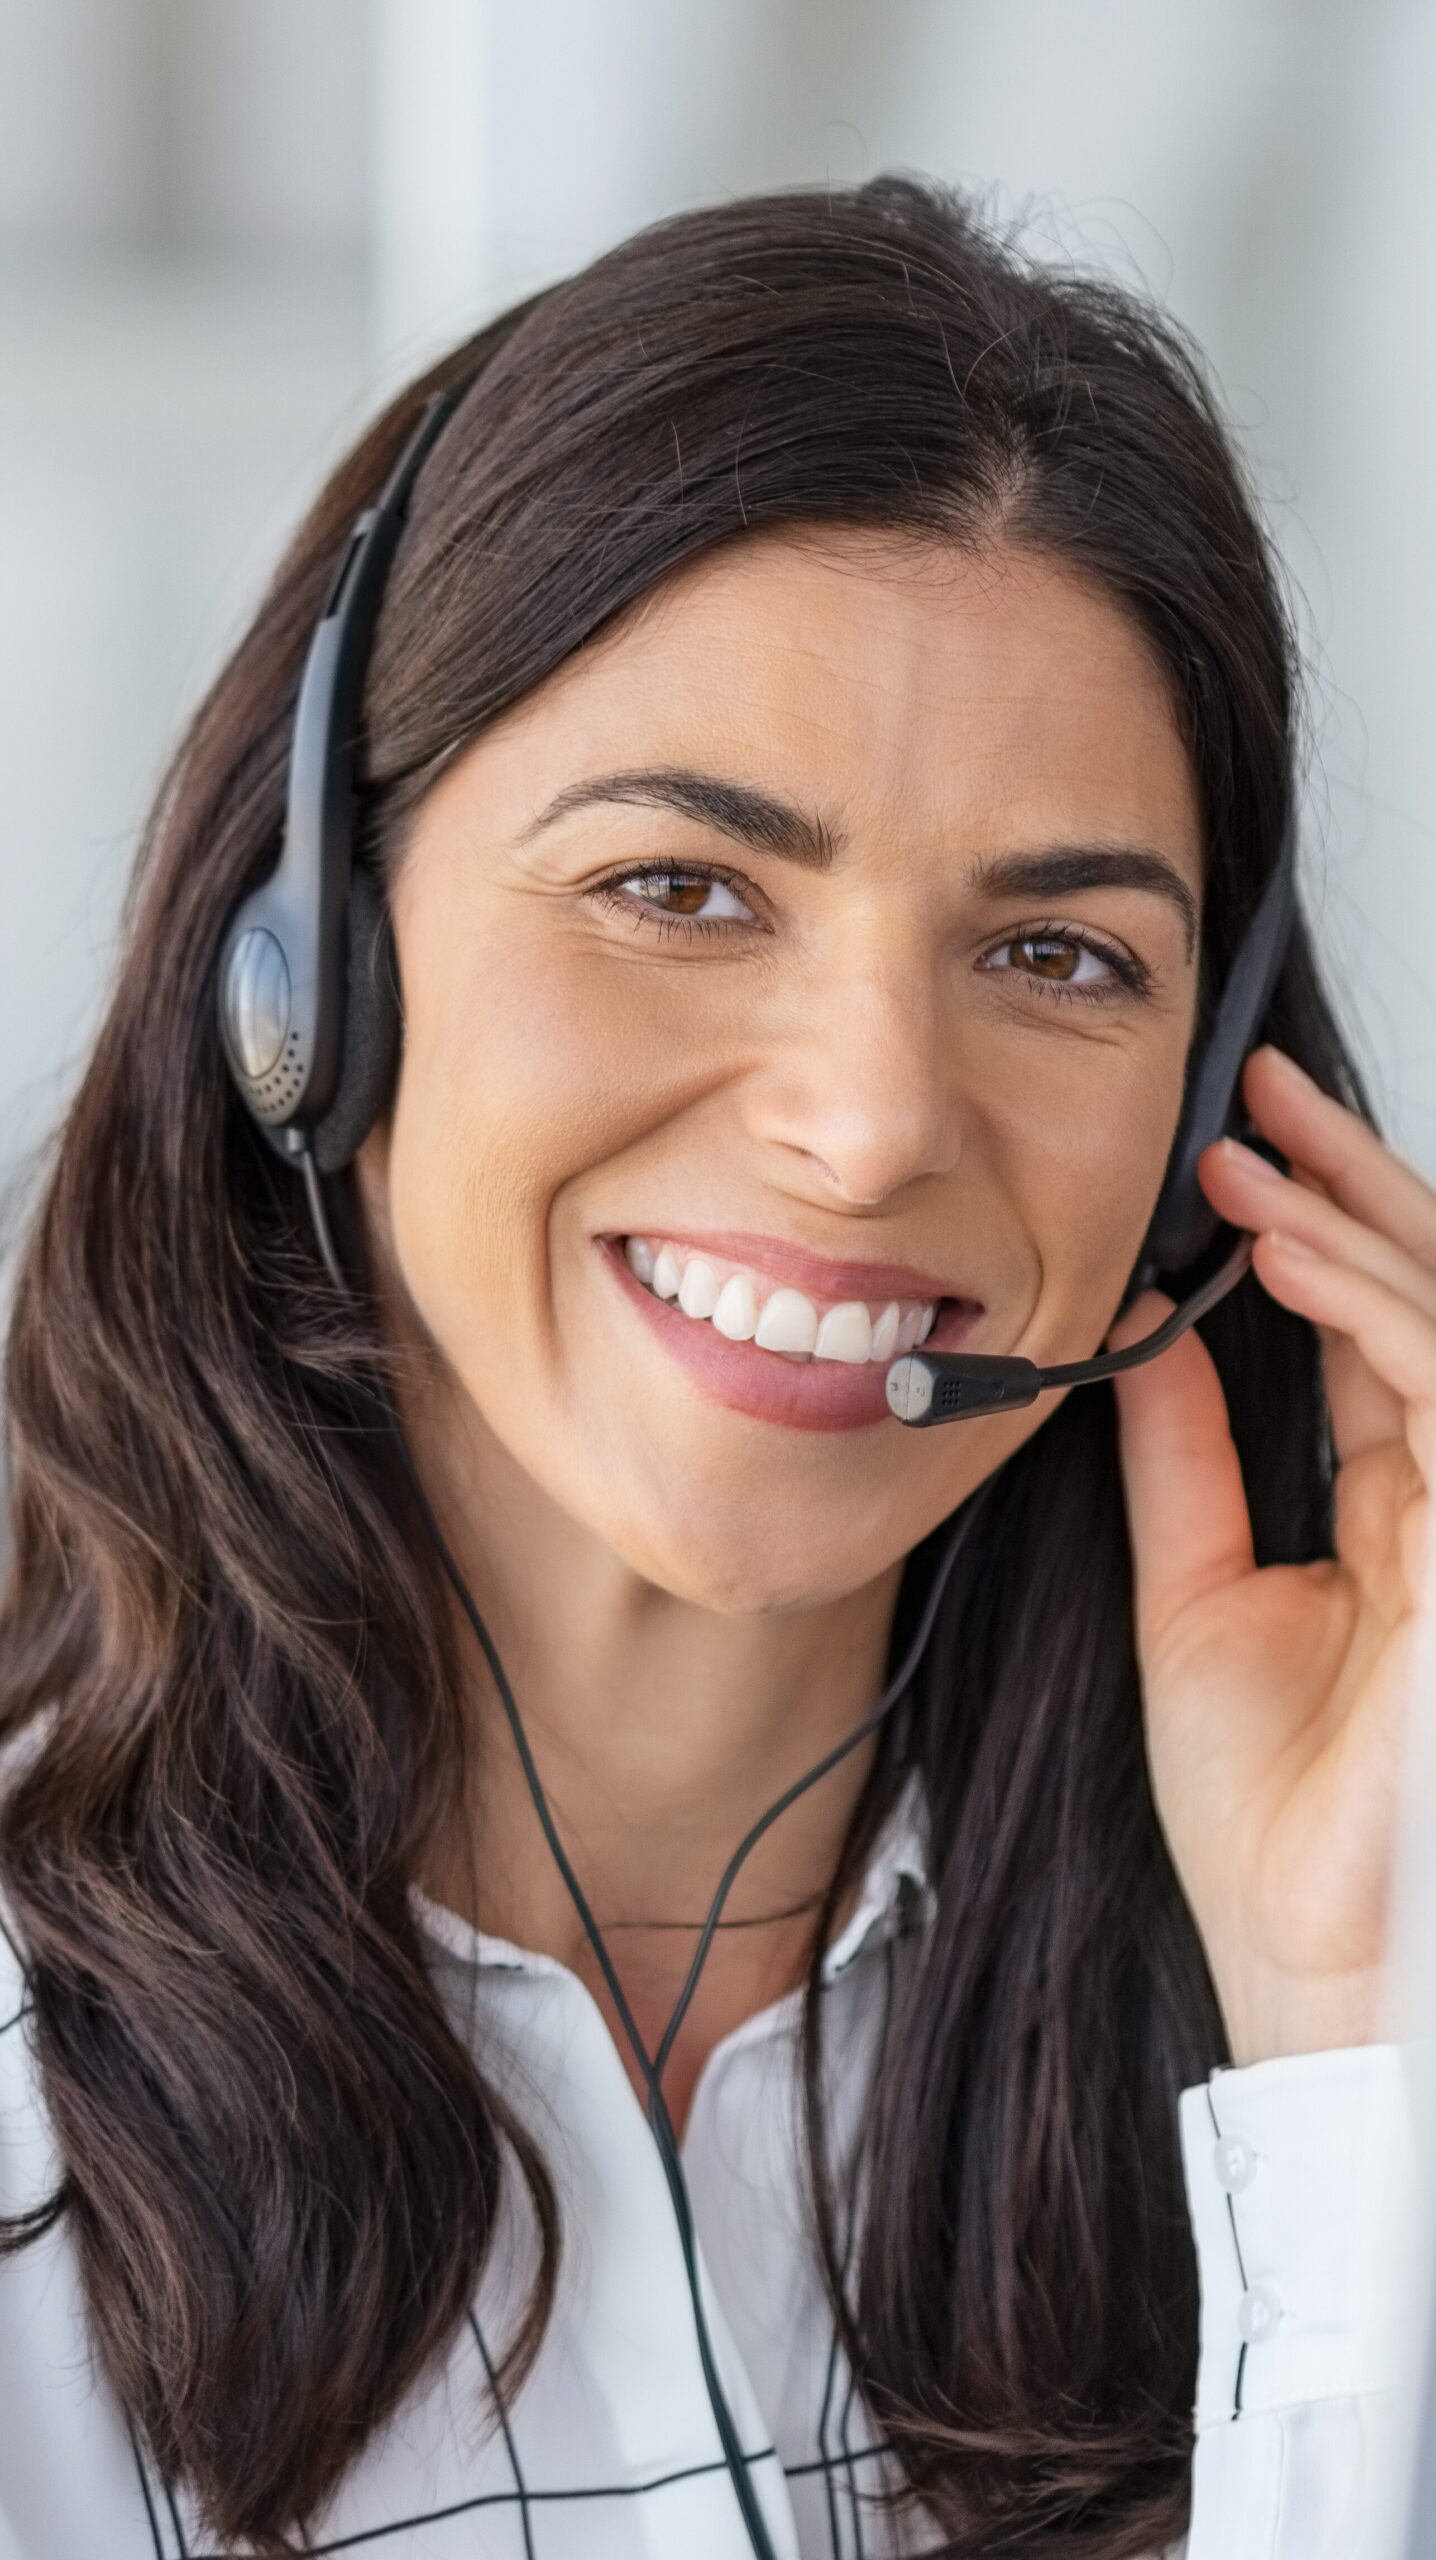 Smiling woman with long, dark hair and a phone headset